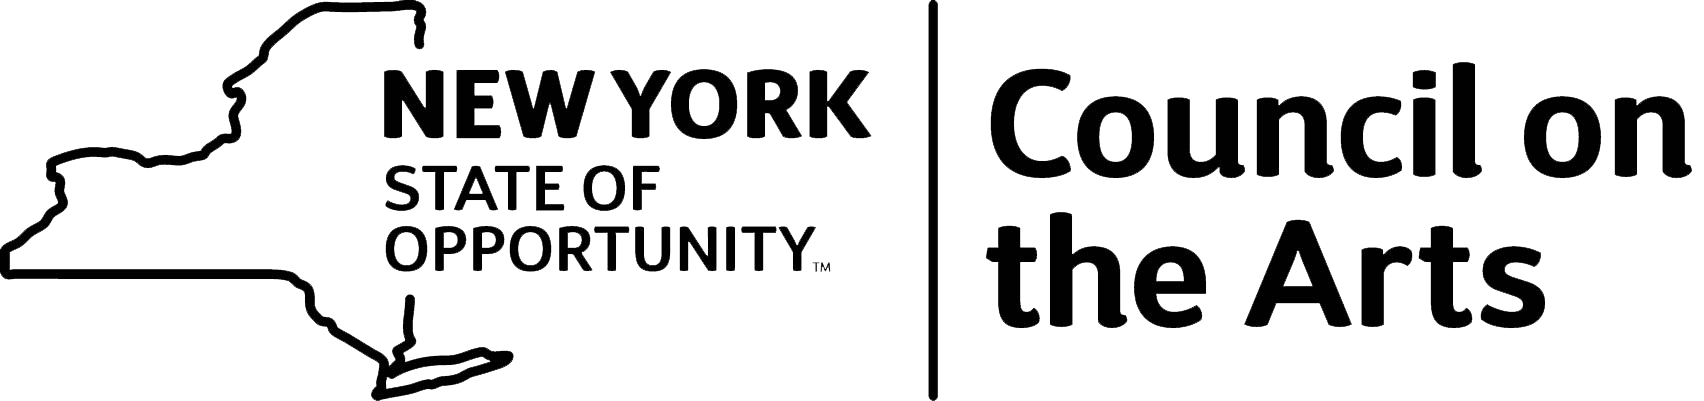 New York State Council on the Arts logo with outline of NY state in black on white background